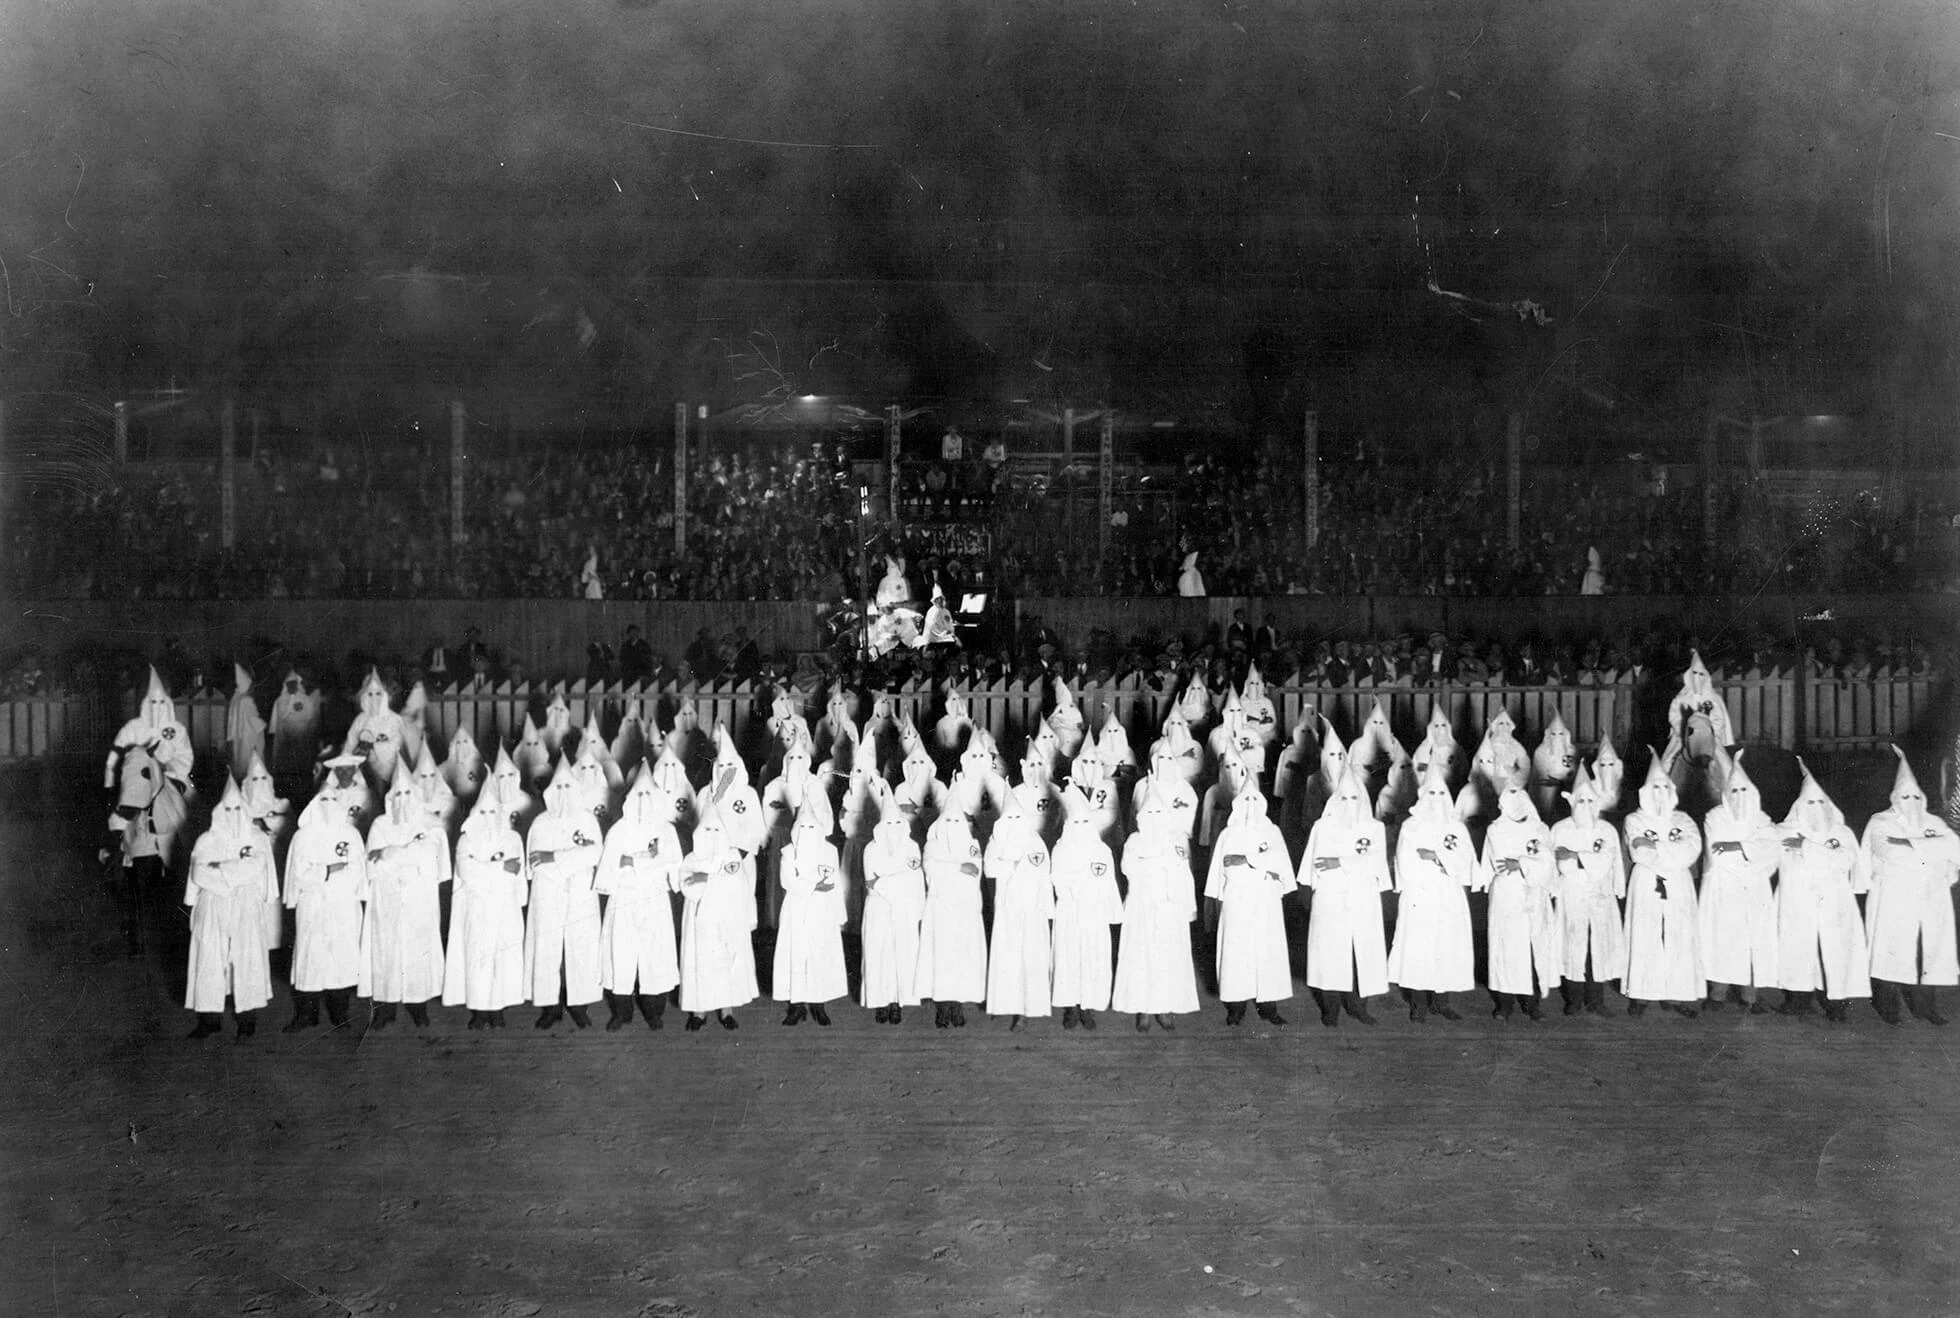 Black and white photo of large group of robed klansmen, lined up in rows. There are approximately 75 people in robes and hoods, and some men are on horses. In the background there is seating, like a stadium, and they appear to be full of people.